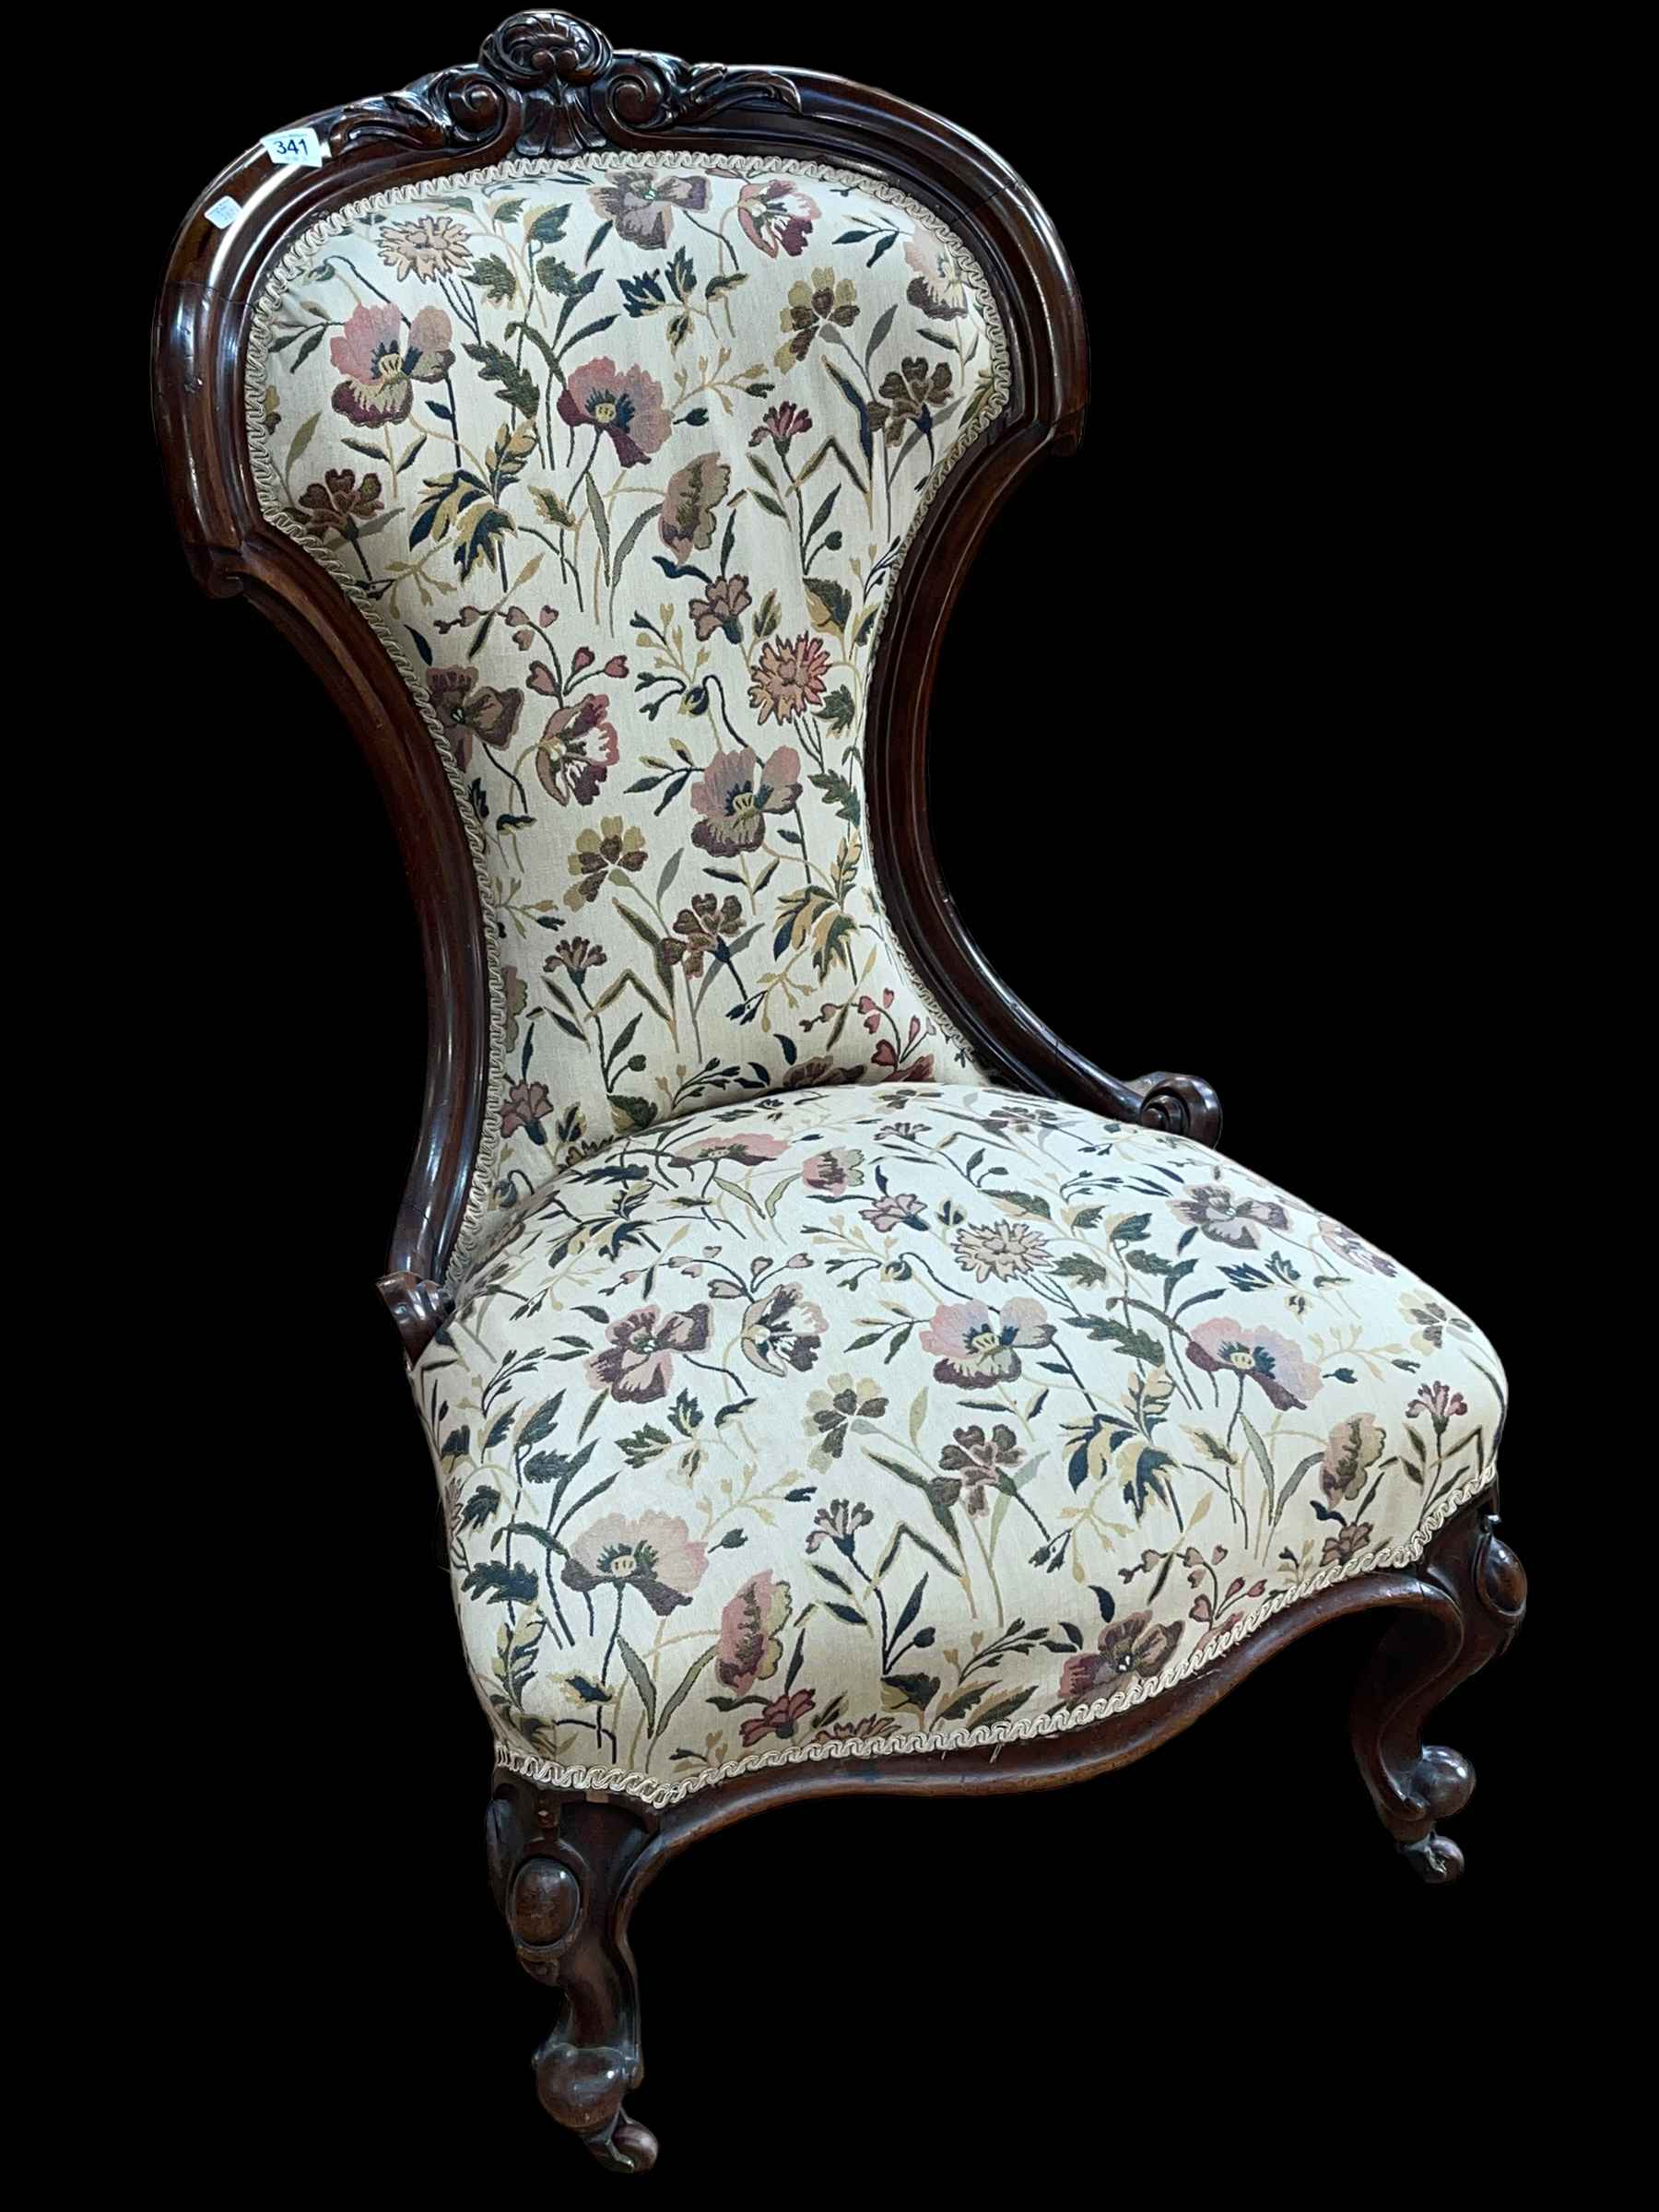 Victorian mahogany framed nursing chair in floral tapestry fabric.